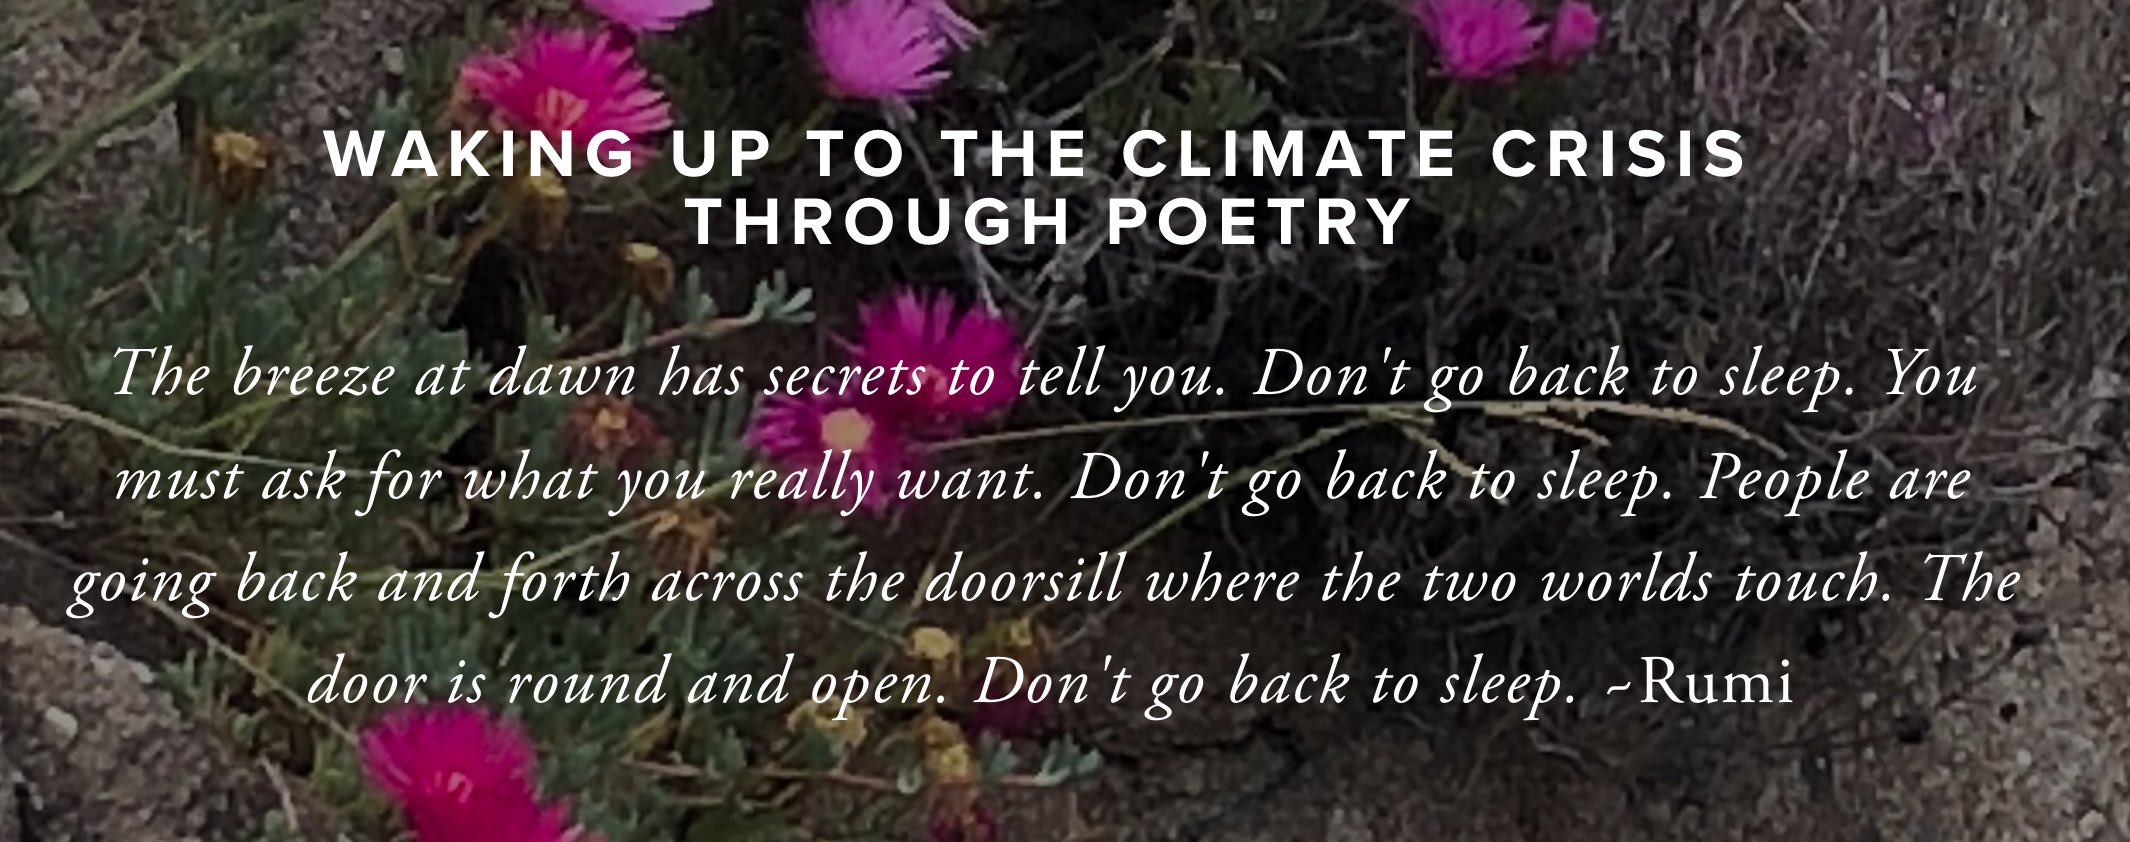 Waking Up to the Climate Crisis through Poetry